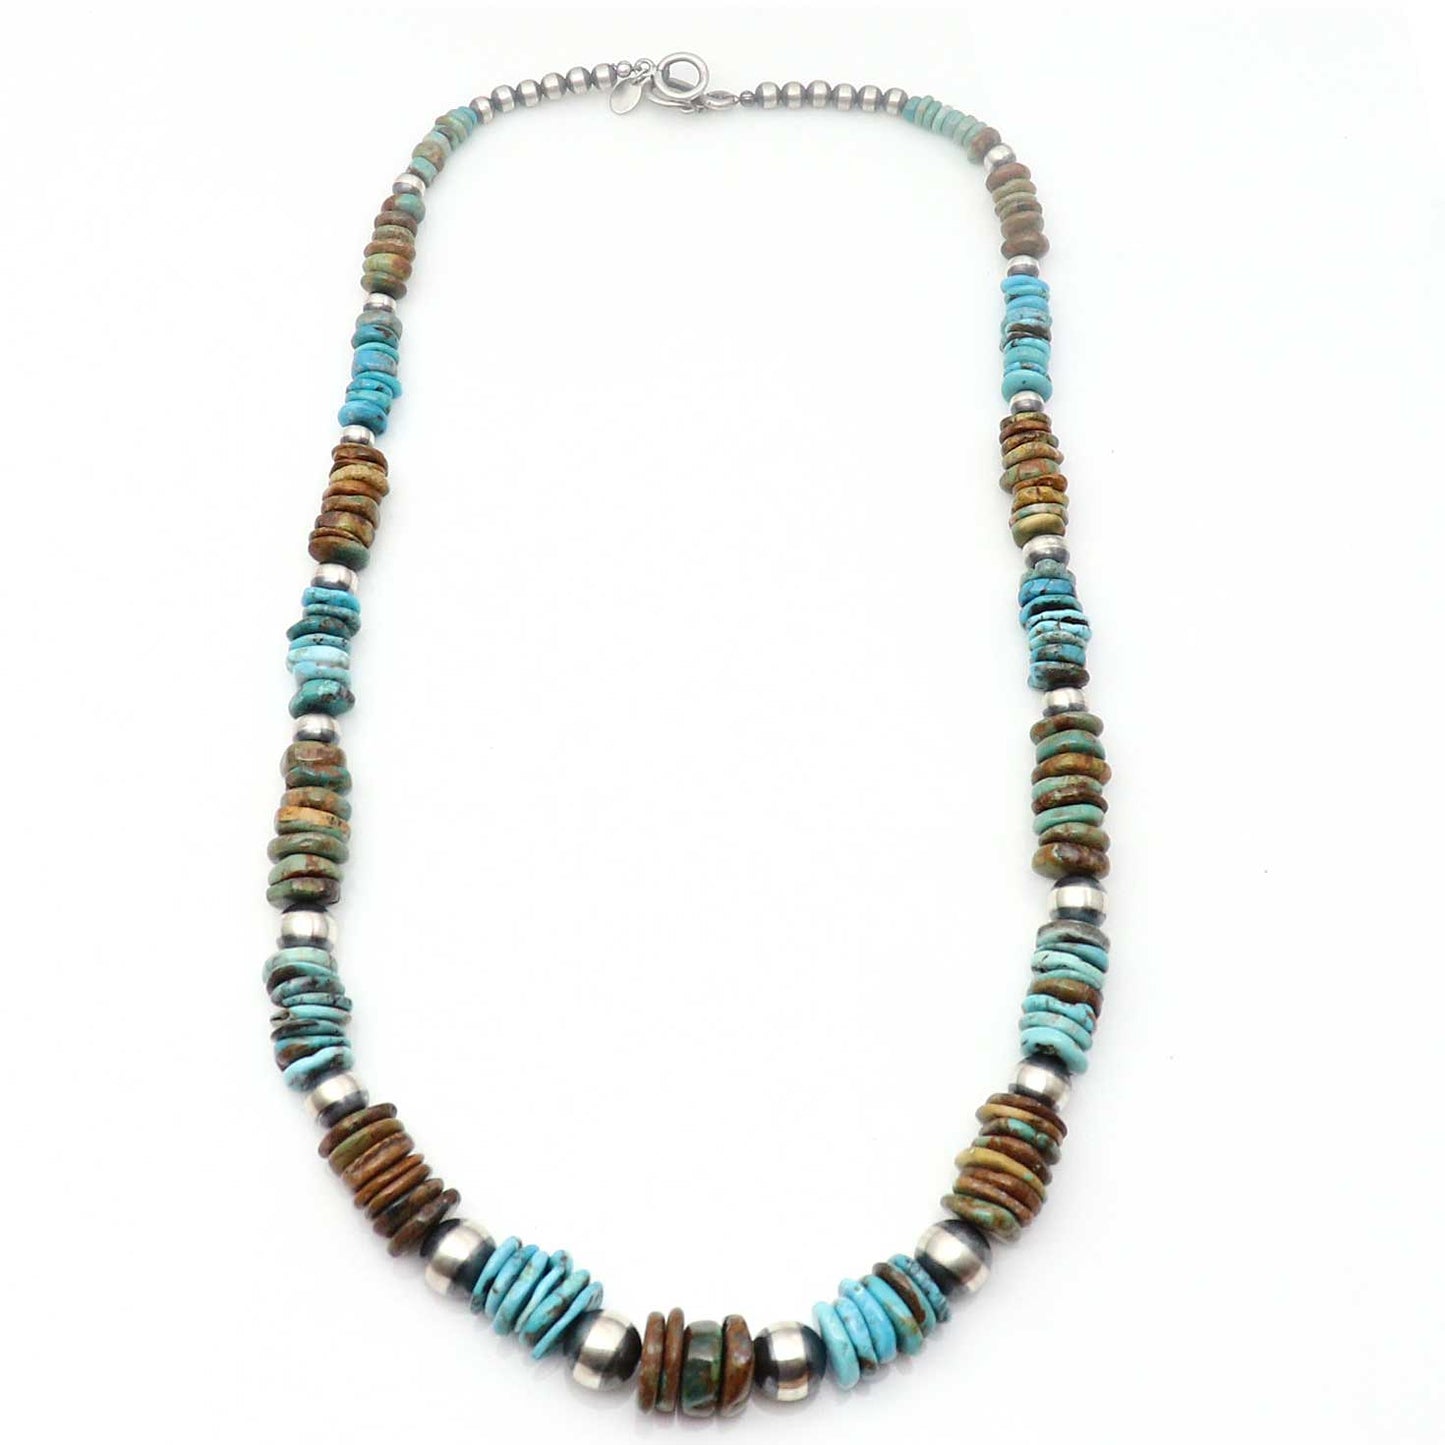 24" Graduated Turquoise Necklace With Silver Accent Beads